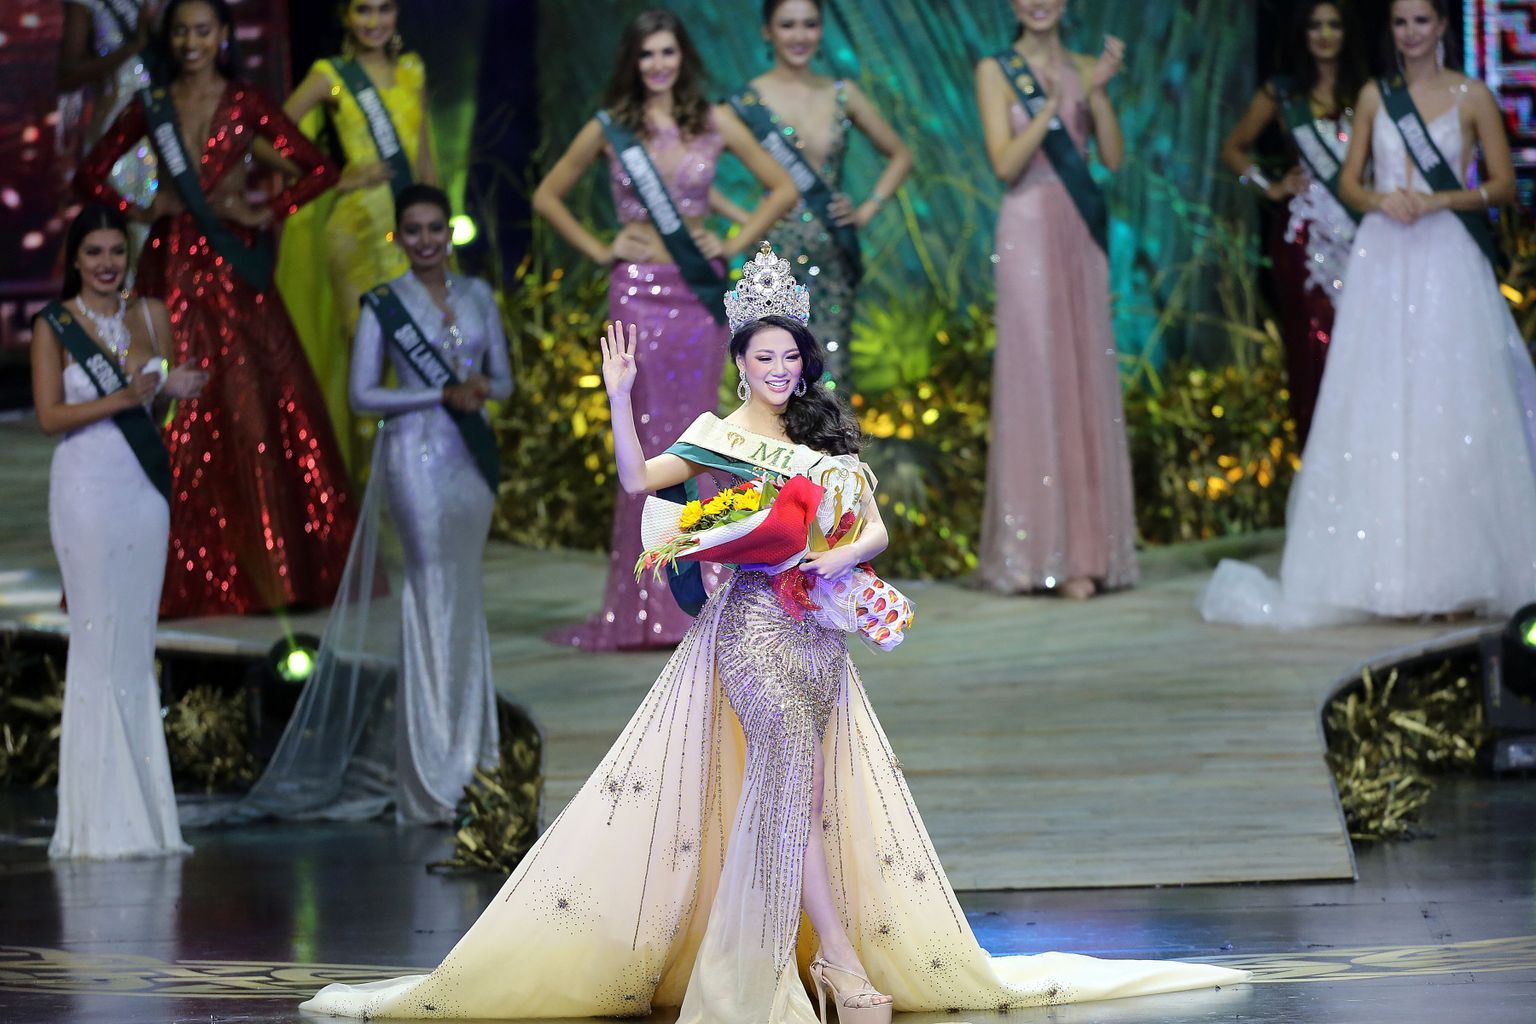 (181103) -- PASAY CITY (THE PHILIPPINES), Nov. 3, 2018 (Xinhua) -- Phuong Khanh Nguyen of Vietnam poses on stage during the coronation night of the Miss Earth 2018 in Pasay City, the Philippines, on Nov. 3, 2018. Phuong Khanh Nguyen of Vietnam won the crown of Miss Earth 2018, beating other contestants from across the world. (Xinhua/Rouelle Umali)  - Rouelle Umali -//CHINENOUVELLE_CHINE014481/Credit:CHINE NOUVELLE/SIPA/1811041255